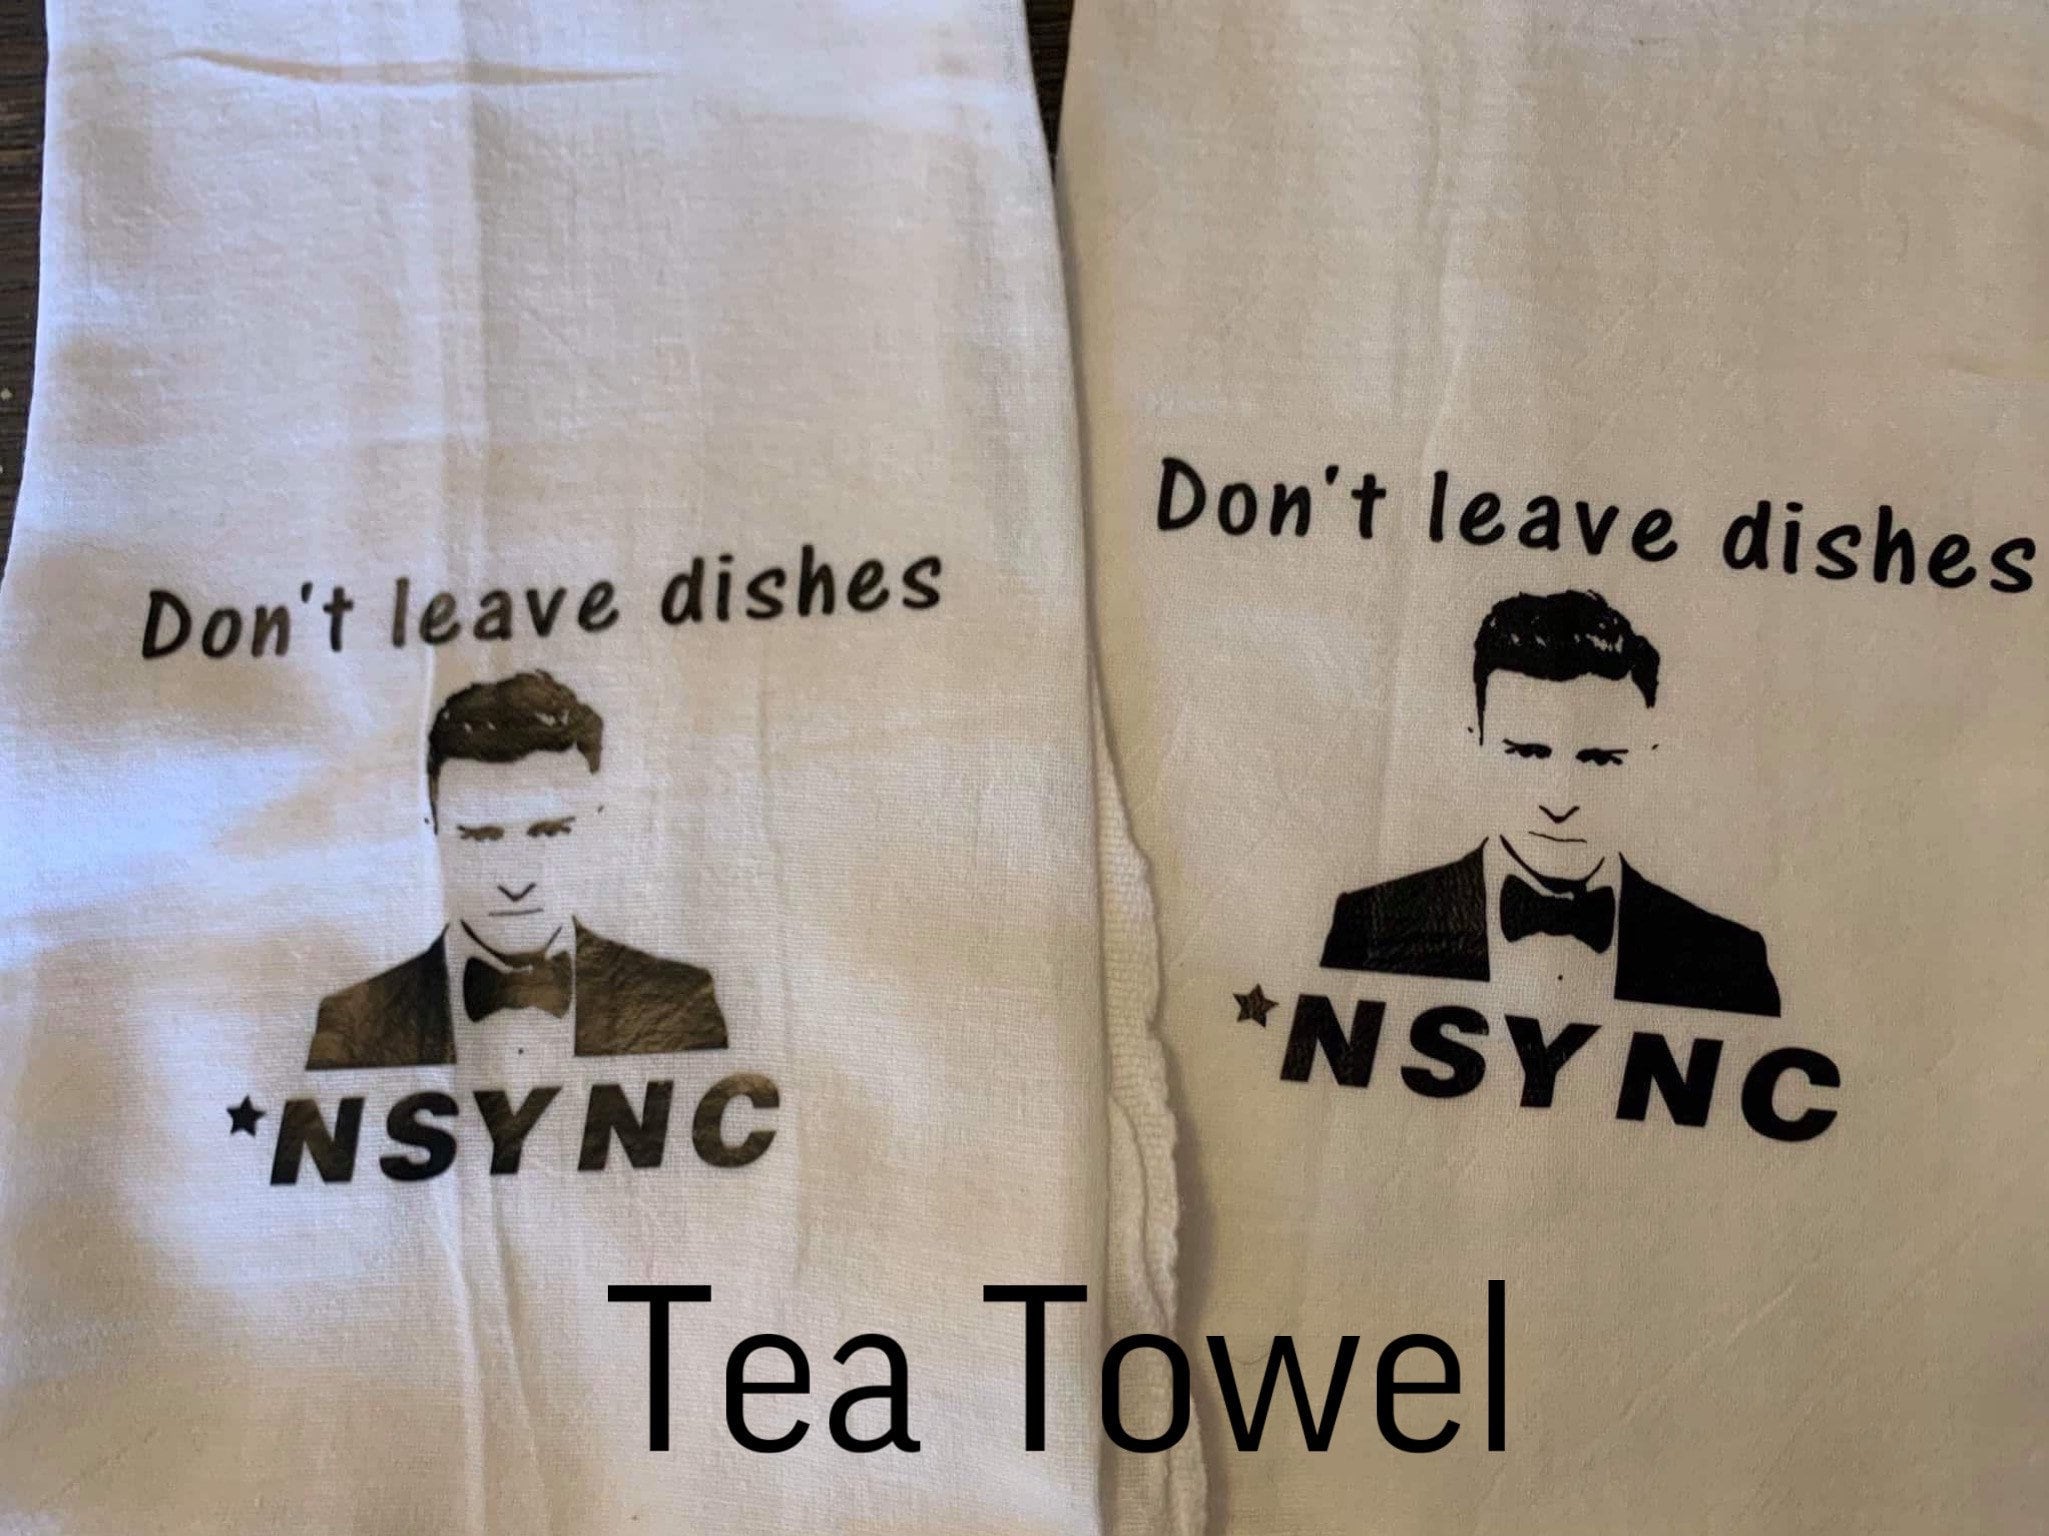 Don't Leave Dishes NSYNC Towels Dish Towels Waffle Weave Towels Sublimation  Dish Towels Birthday Gift Housewarming Gift Kitchen 